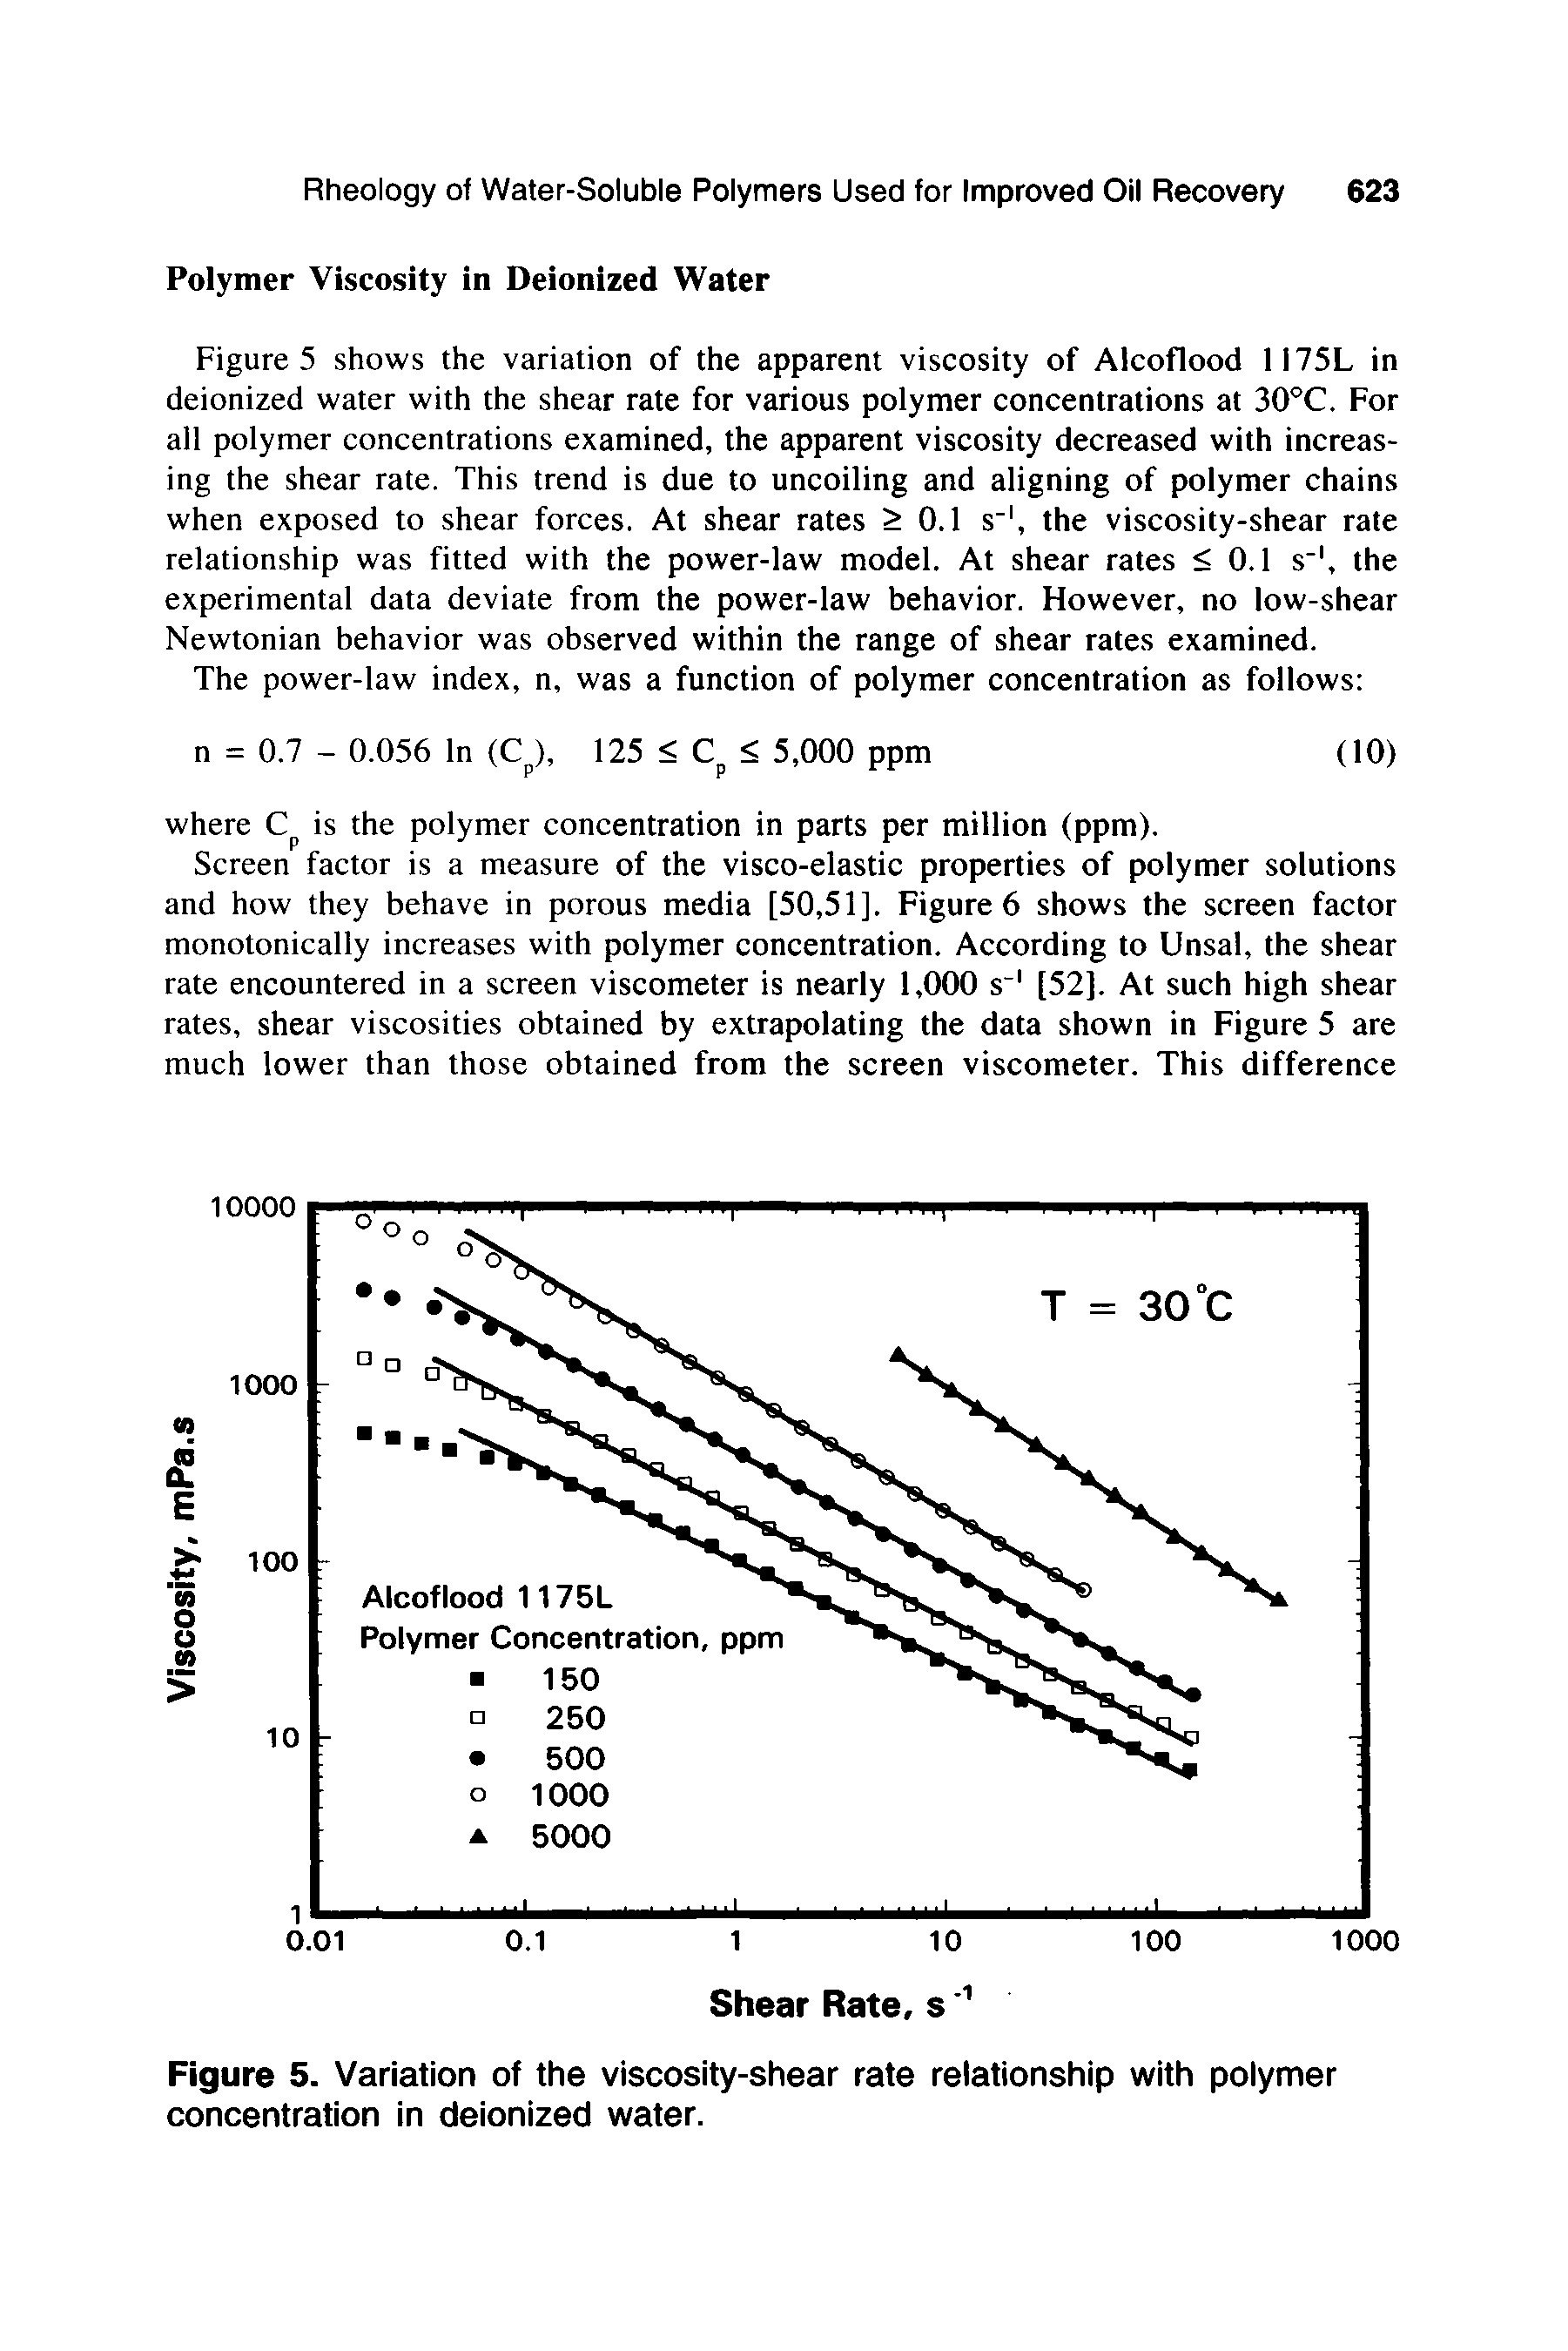 Figures shows the variation of the apparent viscosity of Alcoflood II75L in deionized water with the shear rate for various polymer concentrations at 30°C. For all polymer concentrations examined, the apparent viscosity decreased with increasing the shear rate. This trend is due to uncoiling and aligning of polymer chains when exposed to shear forces. At shear rates >0.1 s", the viscosity-shear rate relationship was fitted with the power-law model. At shear rates < 0.1 s", the experimental data deviate from the power-law behavior. However, no low-shear Newtonian behavior was observed within the range of shear rates examined.